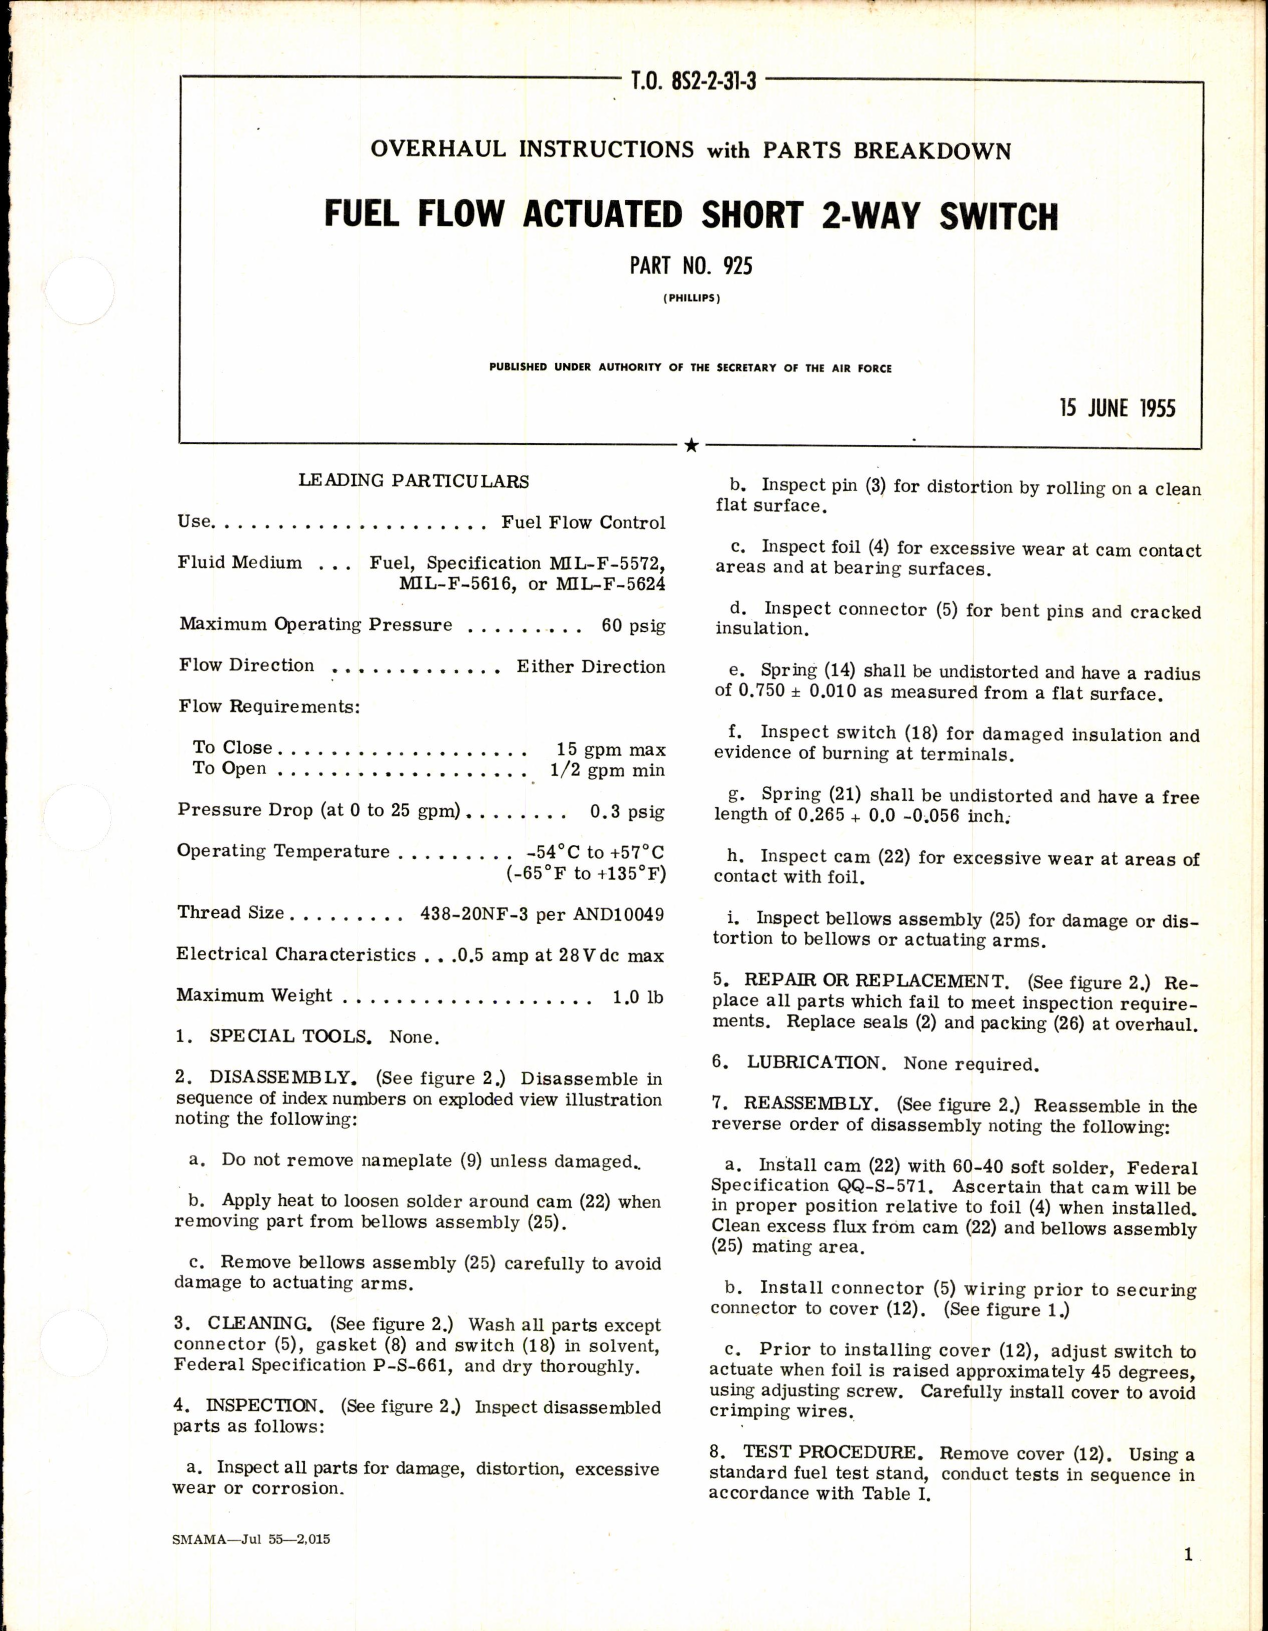 Sample page 1 from AirCorps Library document: Fuel Flow Actuated Short 2-Way Switch Part No 925